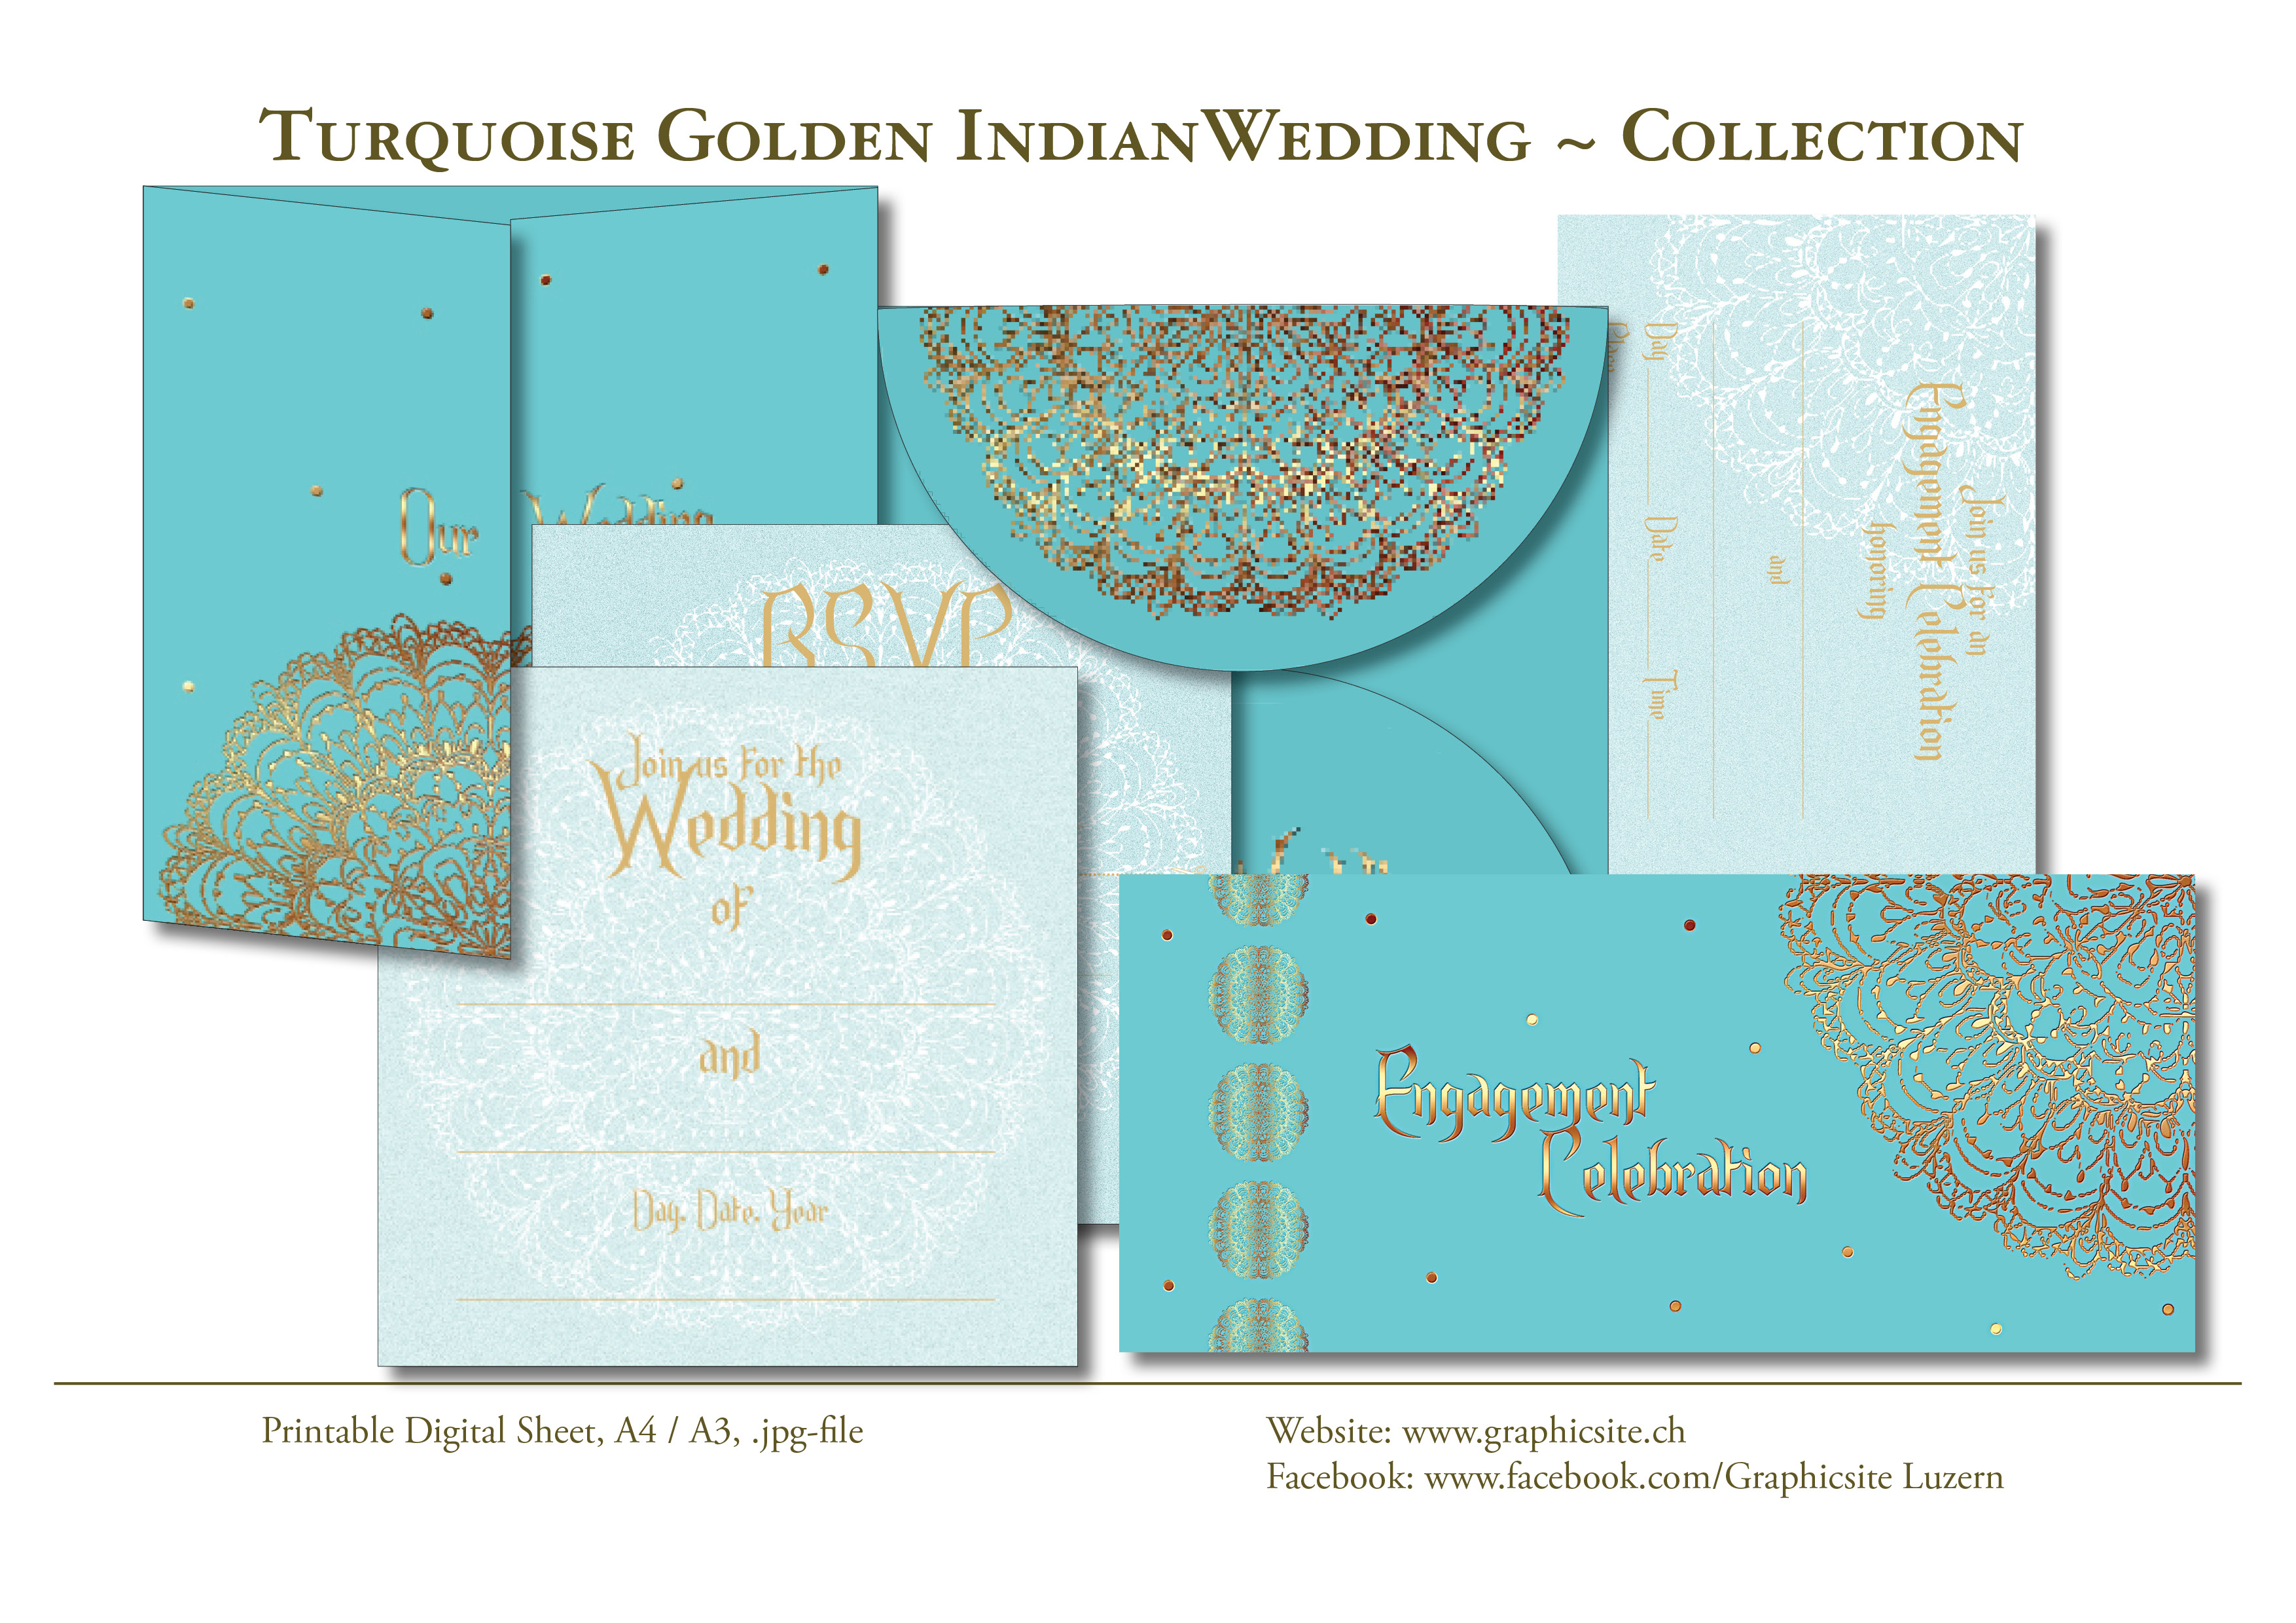 Printable Digital Sheets - Wedding Collection - Turquoise Golden IndianWedding - #stationary, #wedding, #invitation, #cards, #download, #paper, #crafts, #scrapbooking,